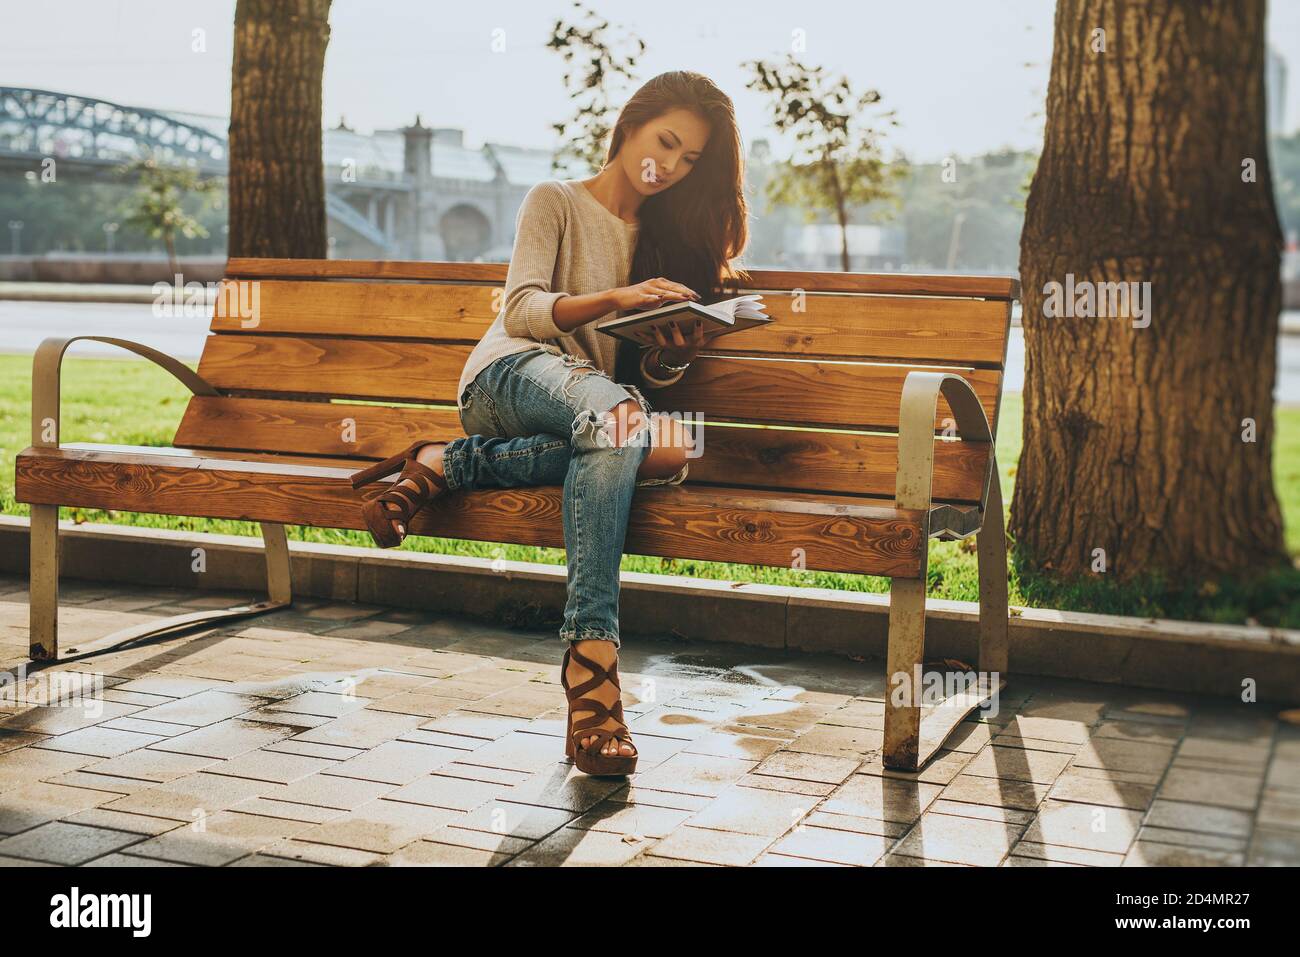 Young beauty and fashion asian woman sitting on bench in city and reading book Stock Photo